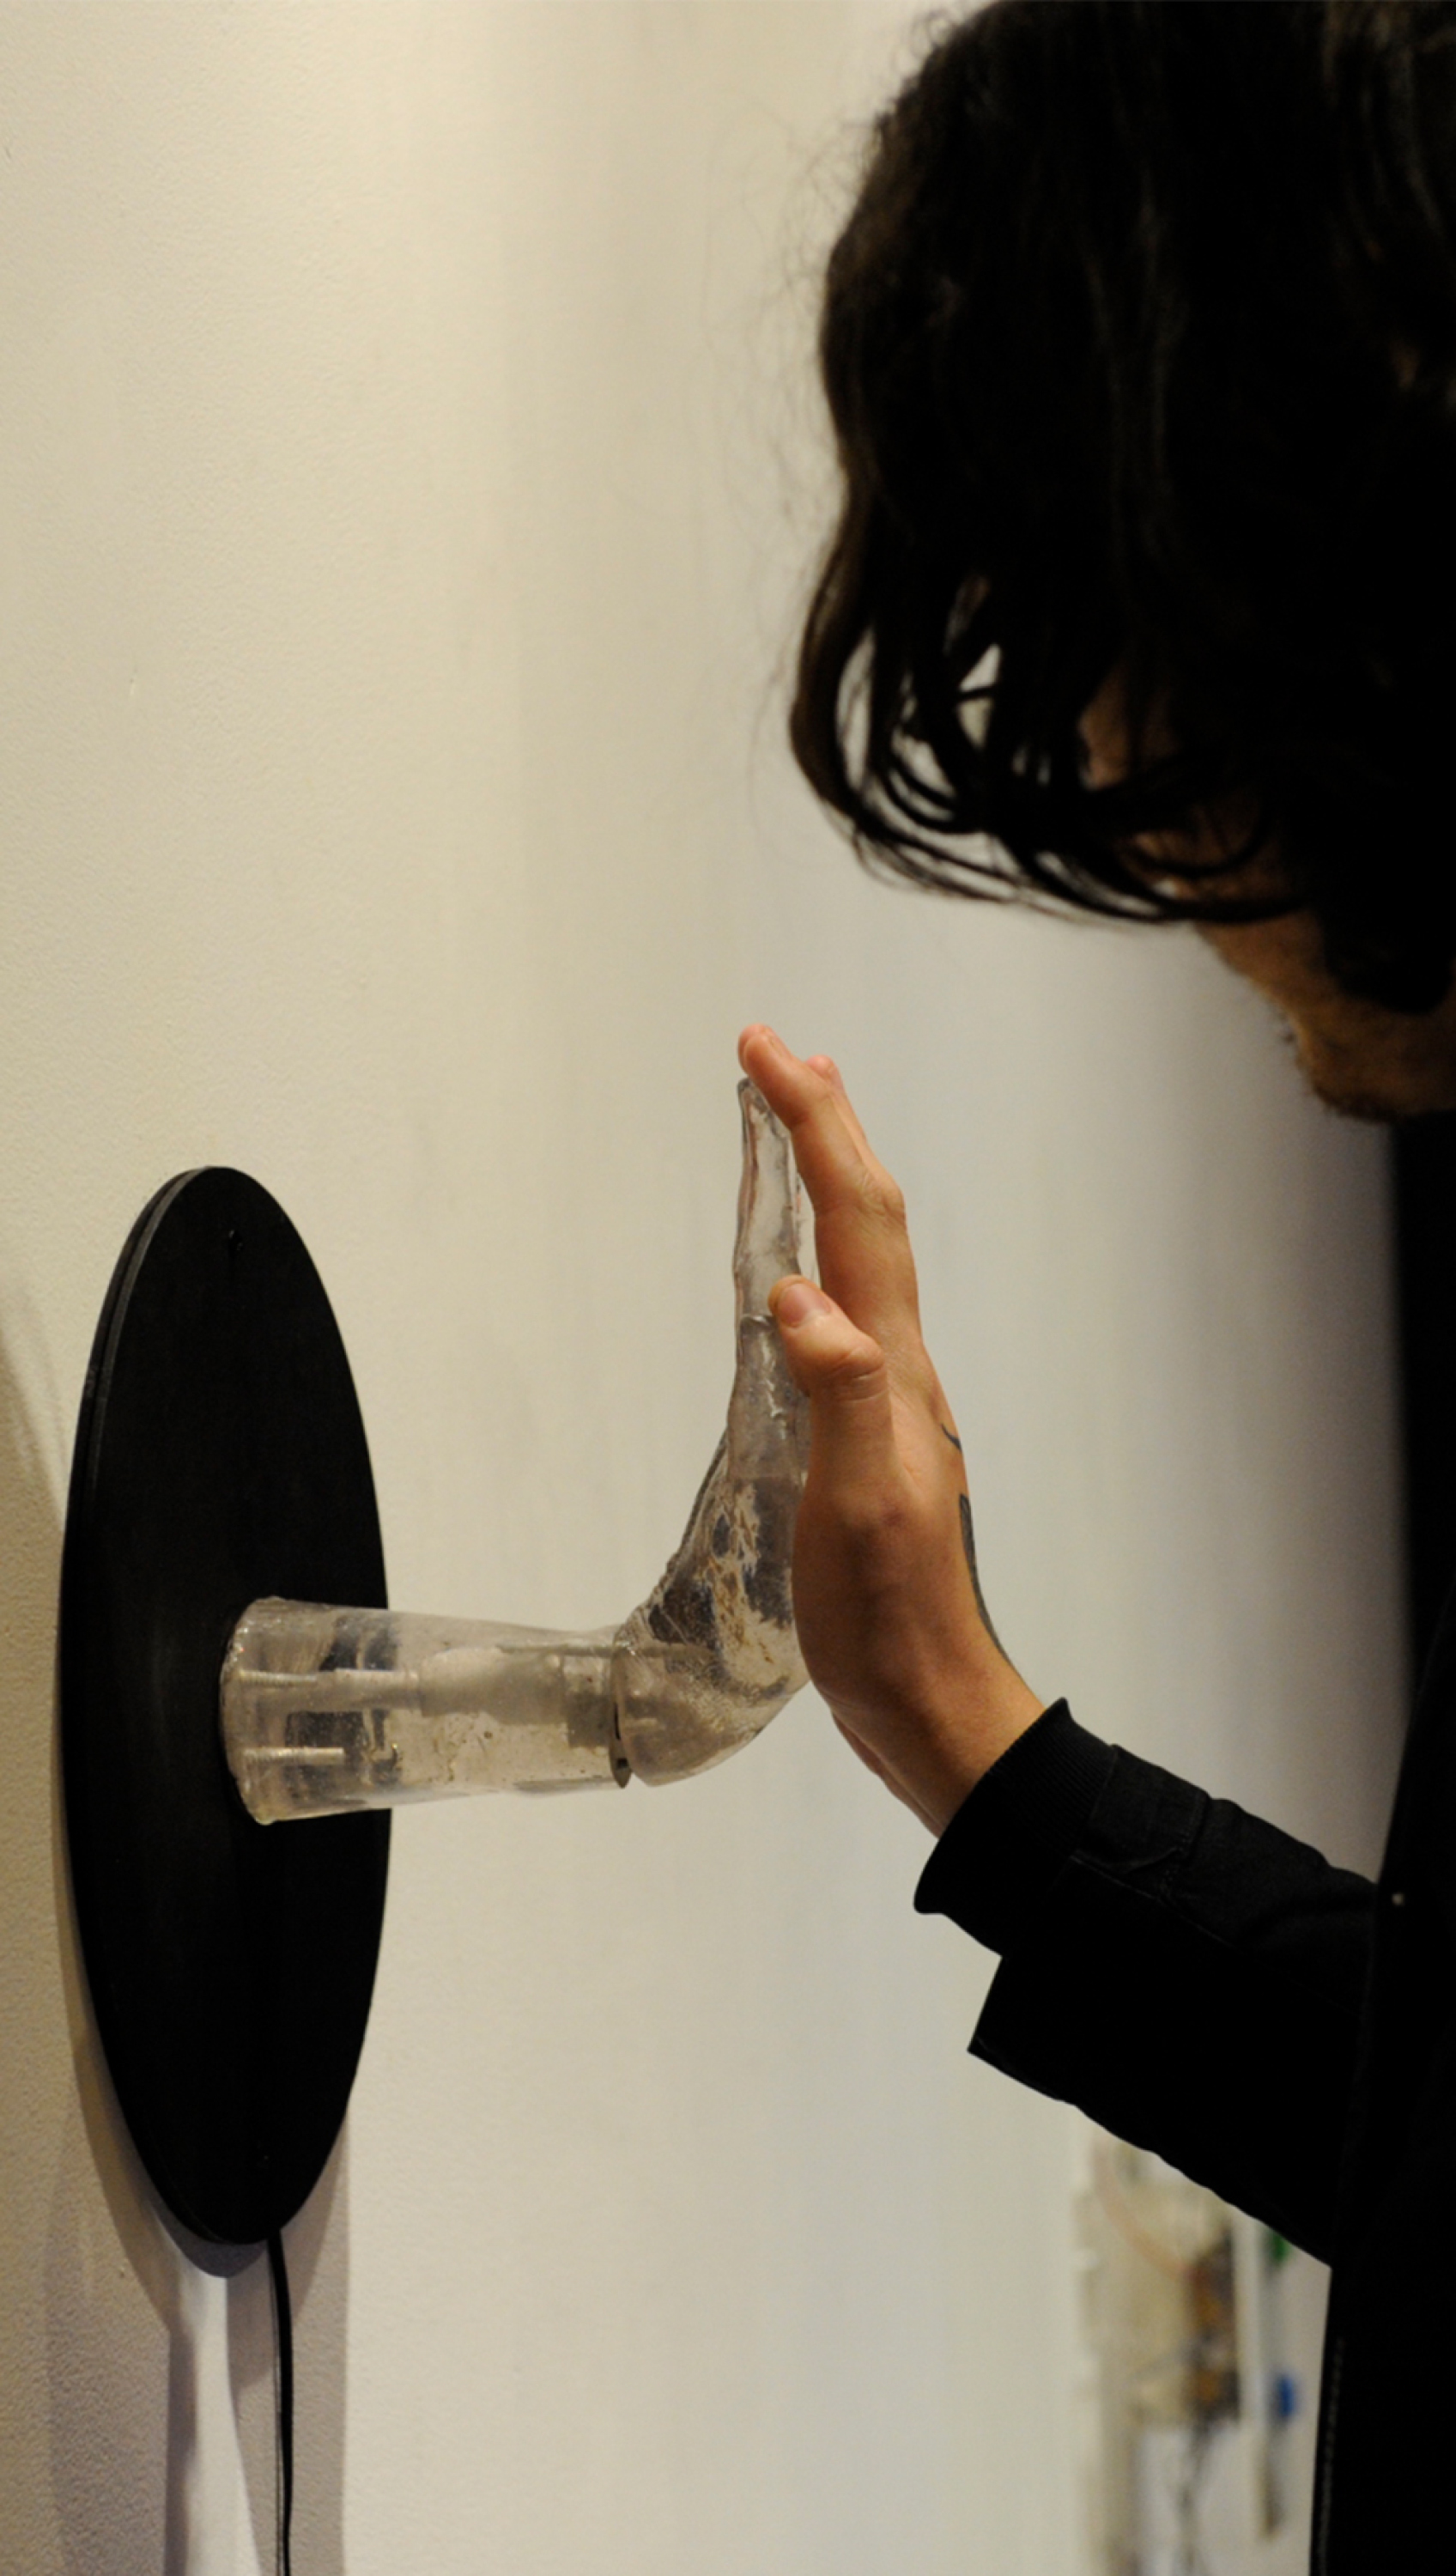 Photo of 'Sensitive Technological' (2018) showing the transparent hand-shaped piece on the left, and a human hand interacting with it on the right. (Photo: Rodrigo Bello Marroni)